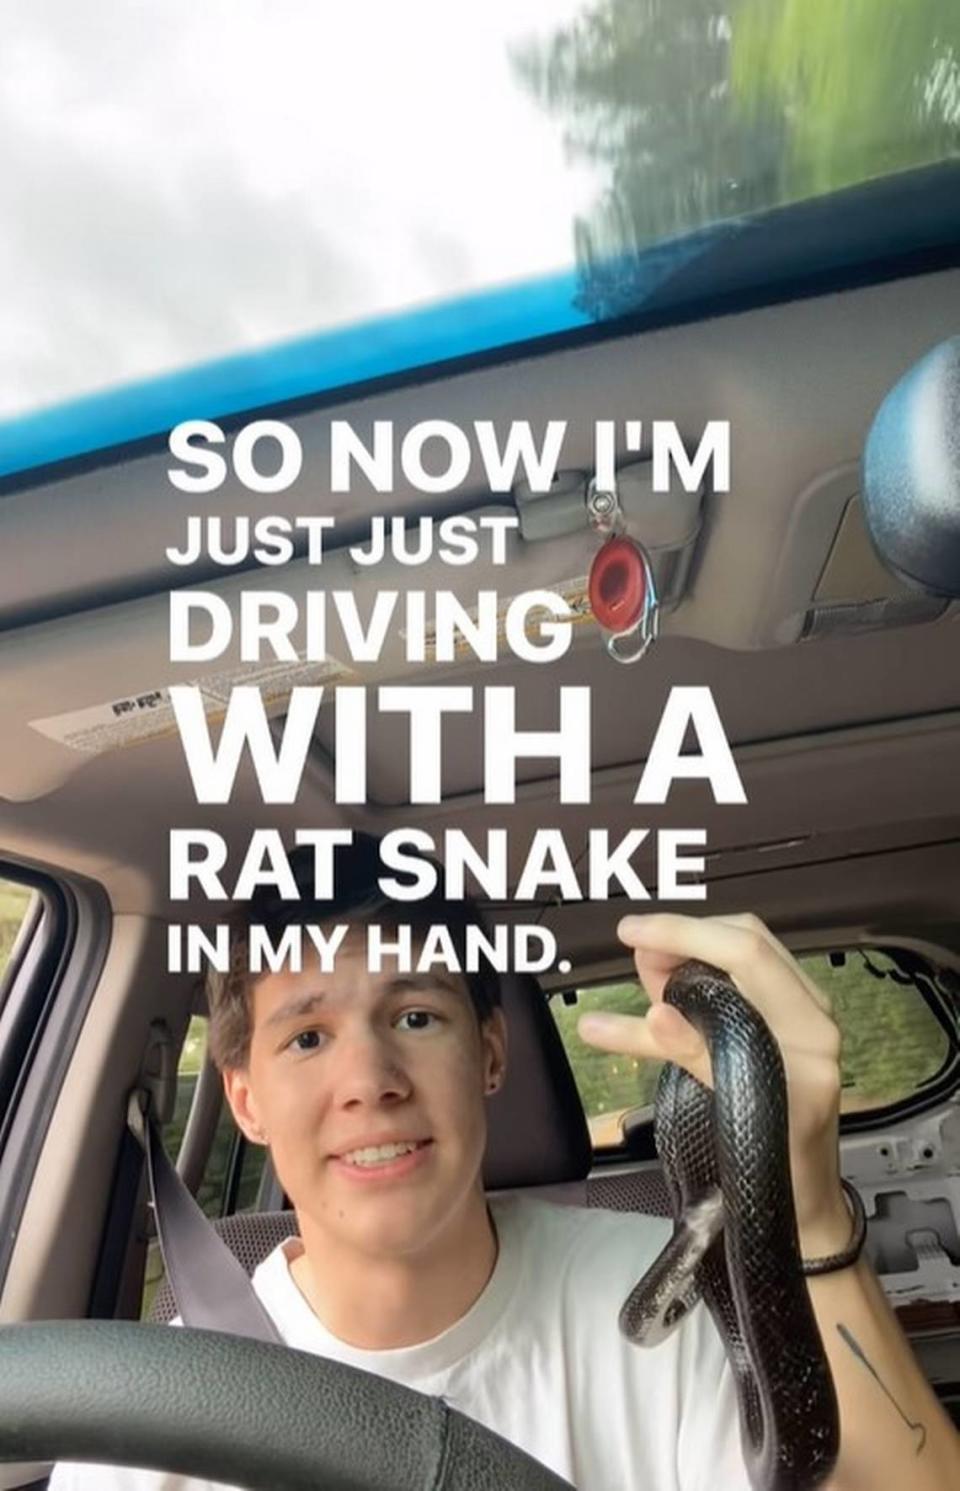 Chris Gifford’s Instagram feed is filled with snake videos, this one shot from a moving car. Rat snakes are not venomous.